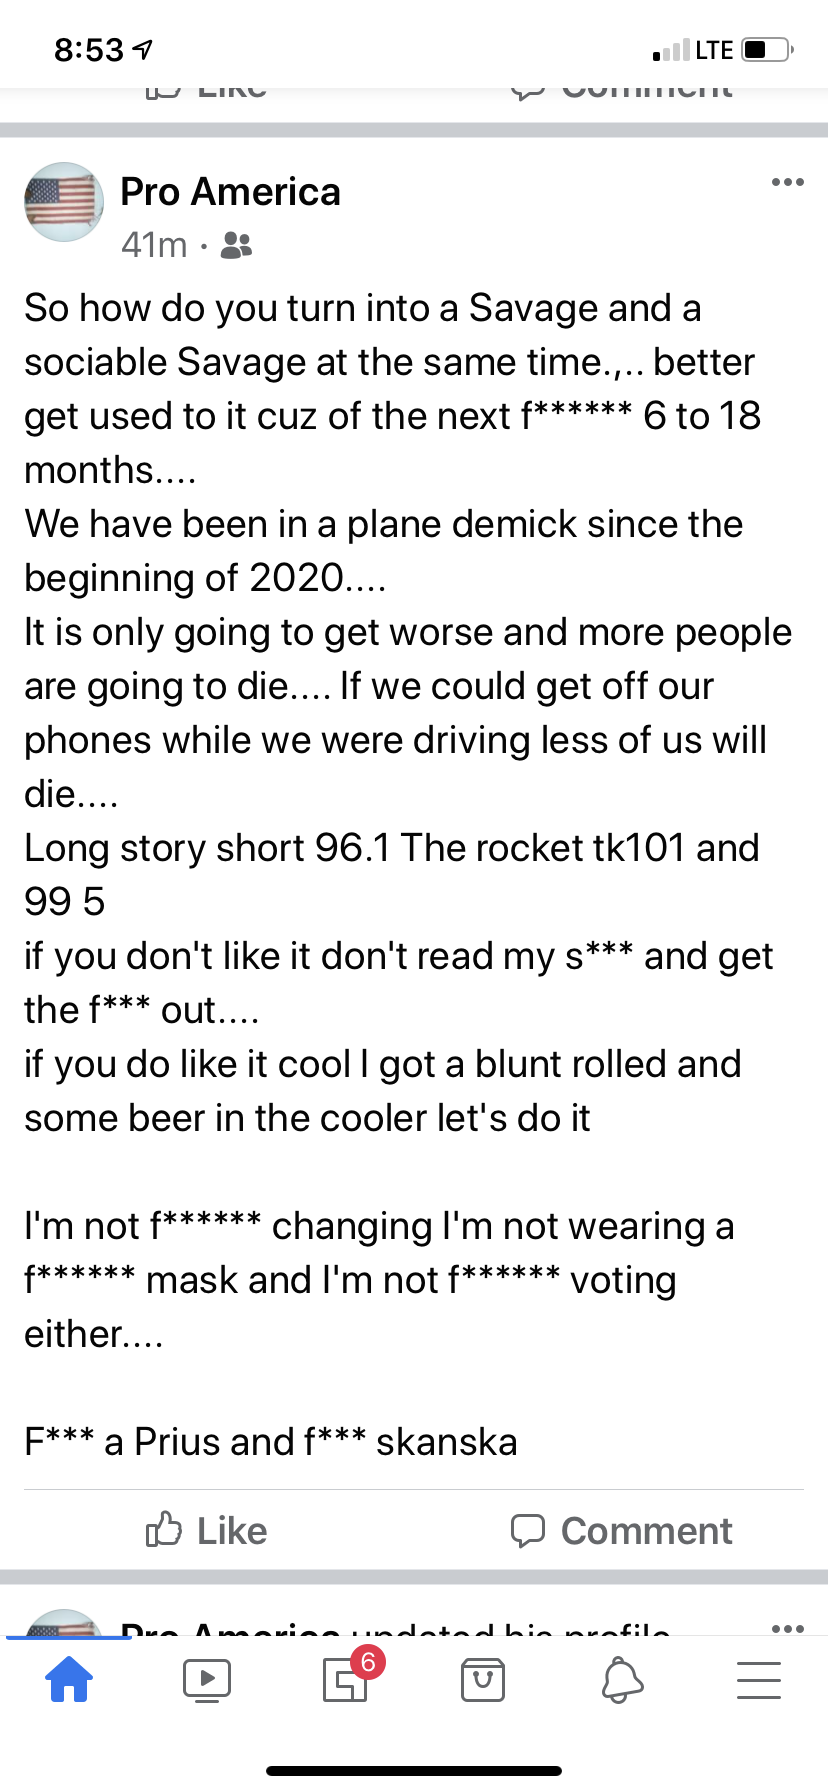 Florida man is surviving the plane demick with ease.